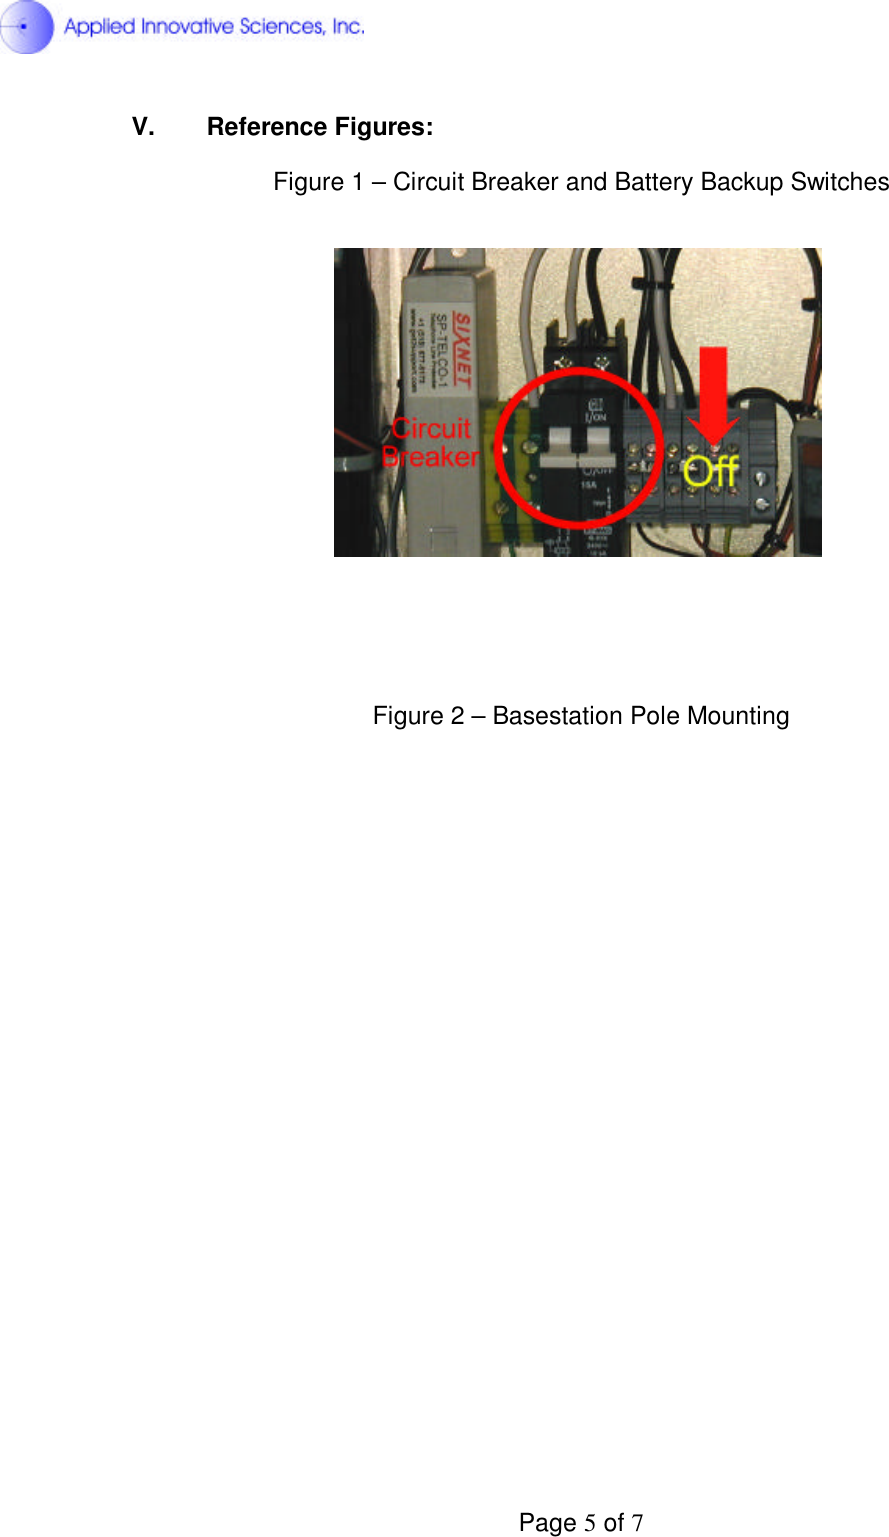  Page 5 of 7 V.  Reference Figures:  Figure 1 – Circuit Breaker and Battery Backup Switches       Figure 2 – Basestation Pole Mounting                           